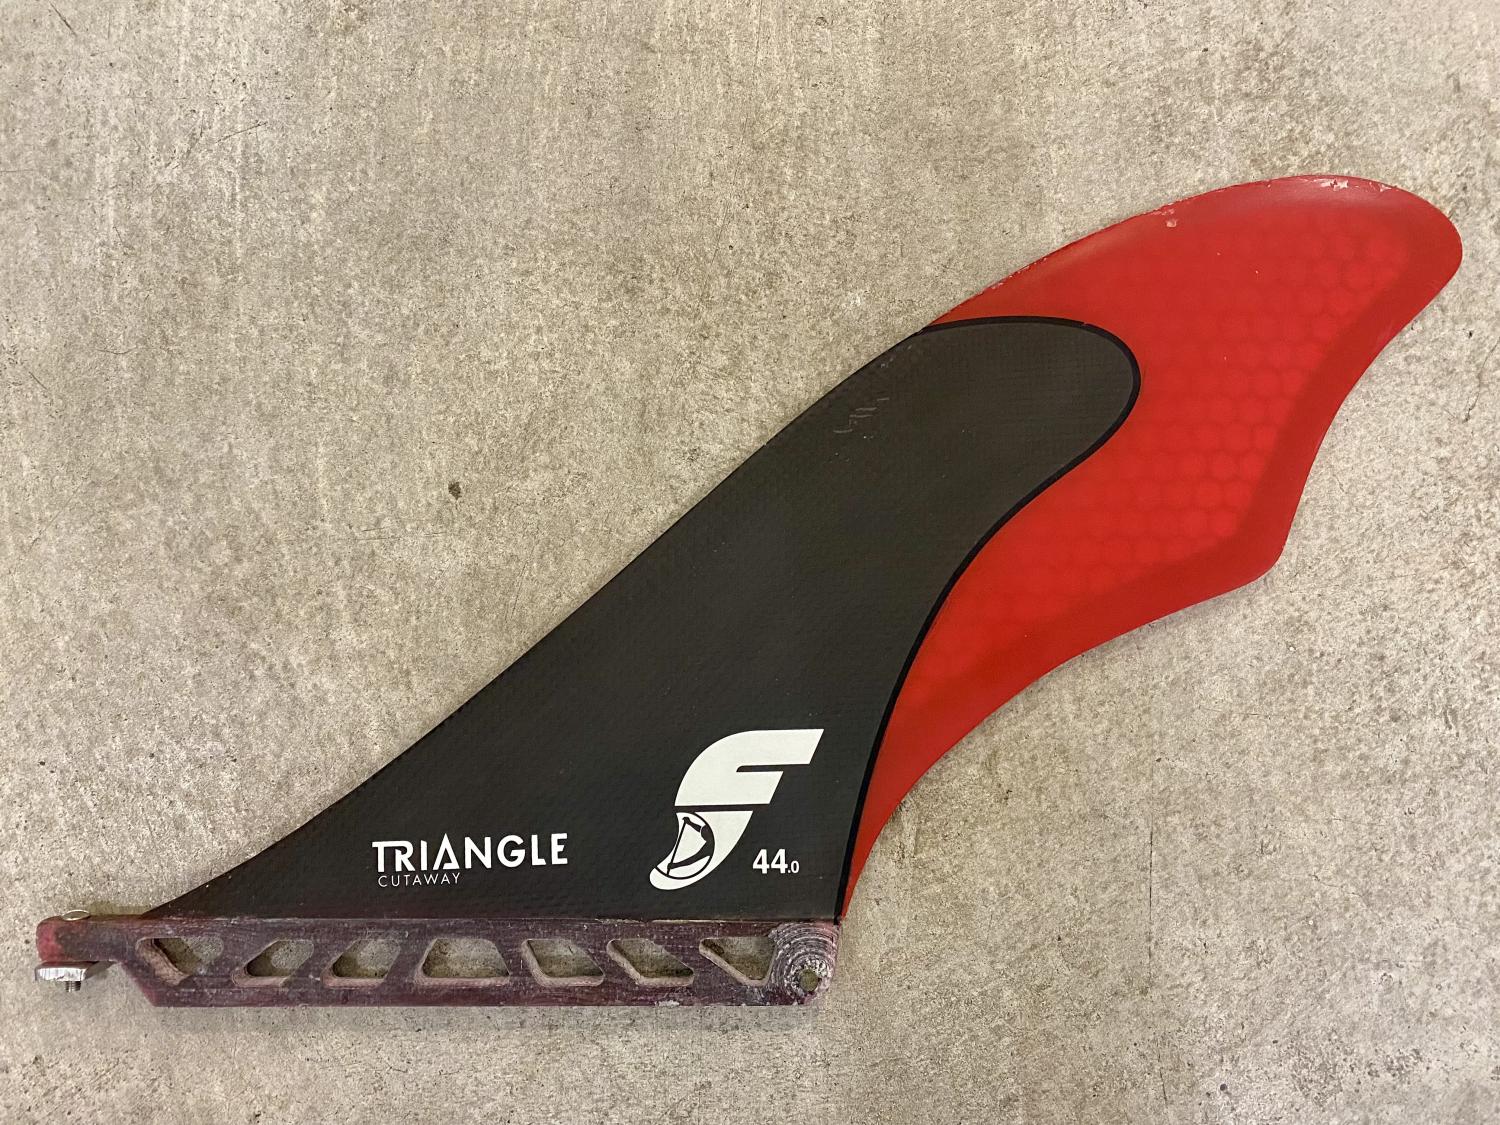 USED FIN TRIANGLE CUTWAY 44.0 [Futures FIN] 